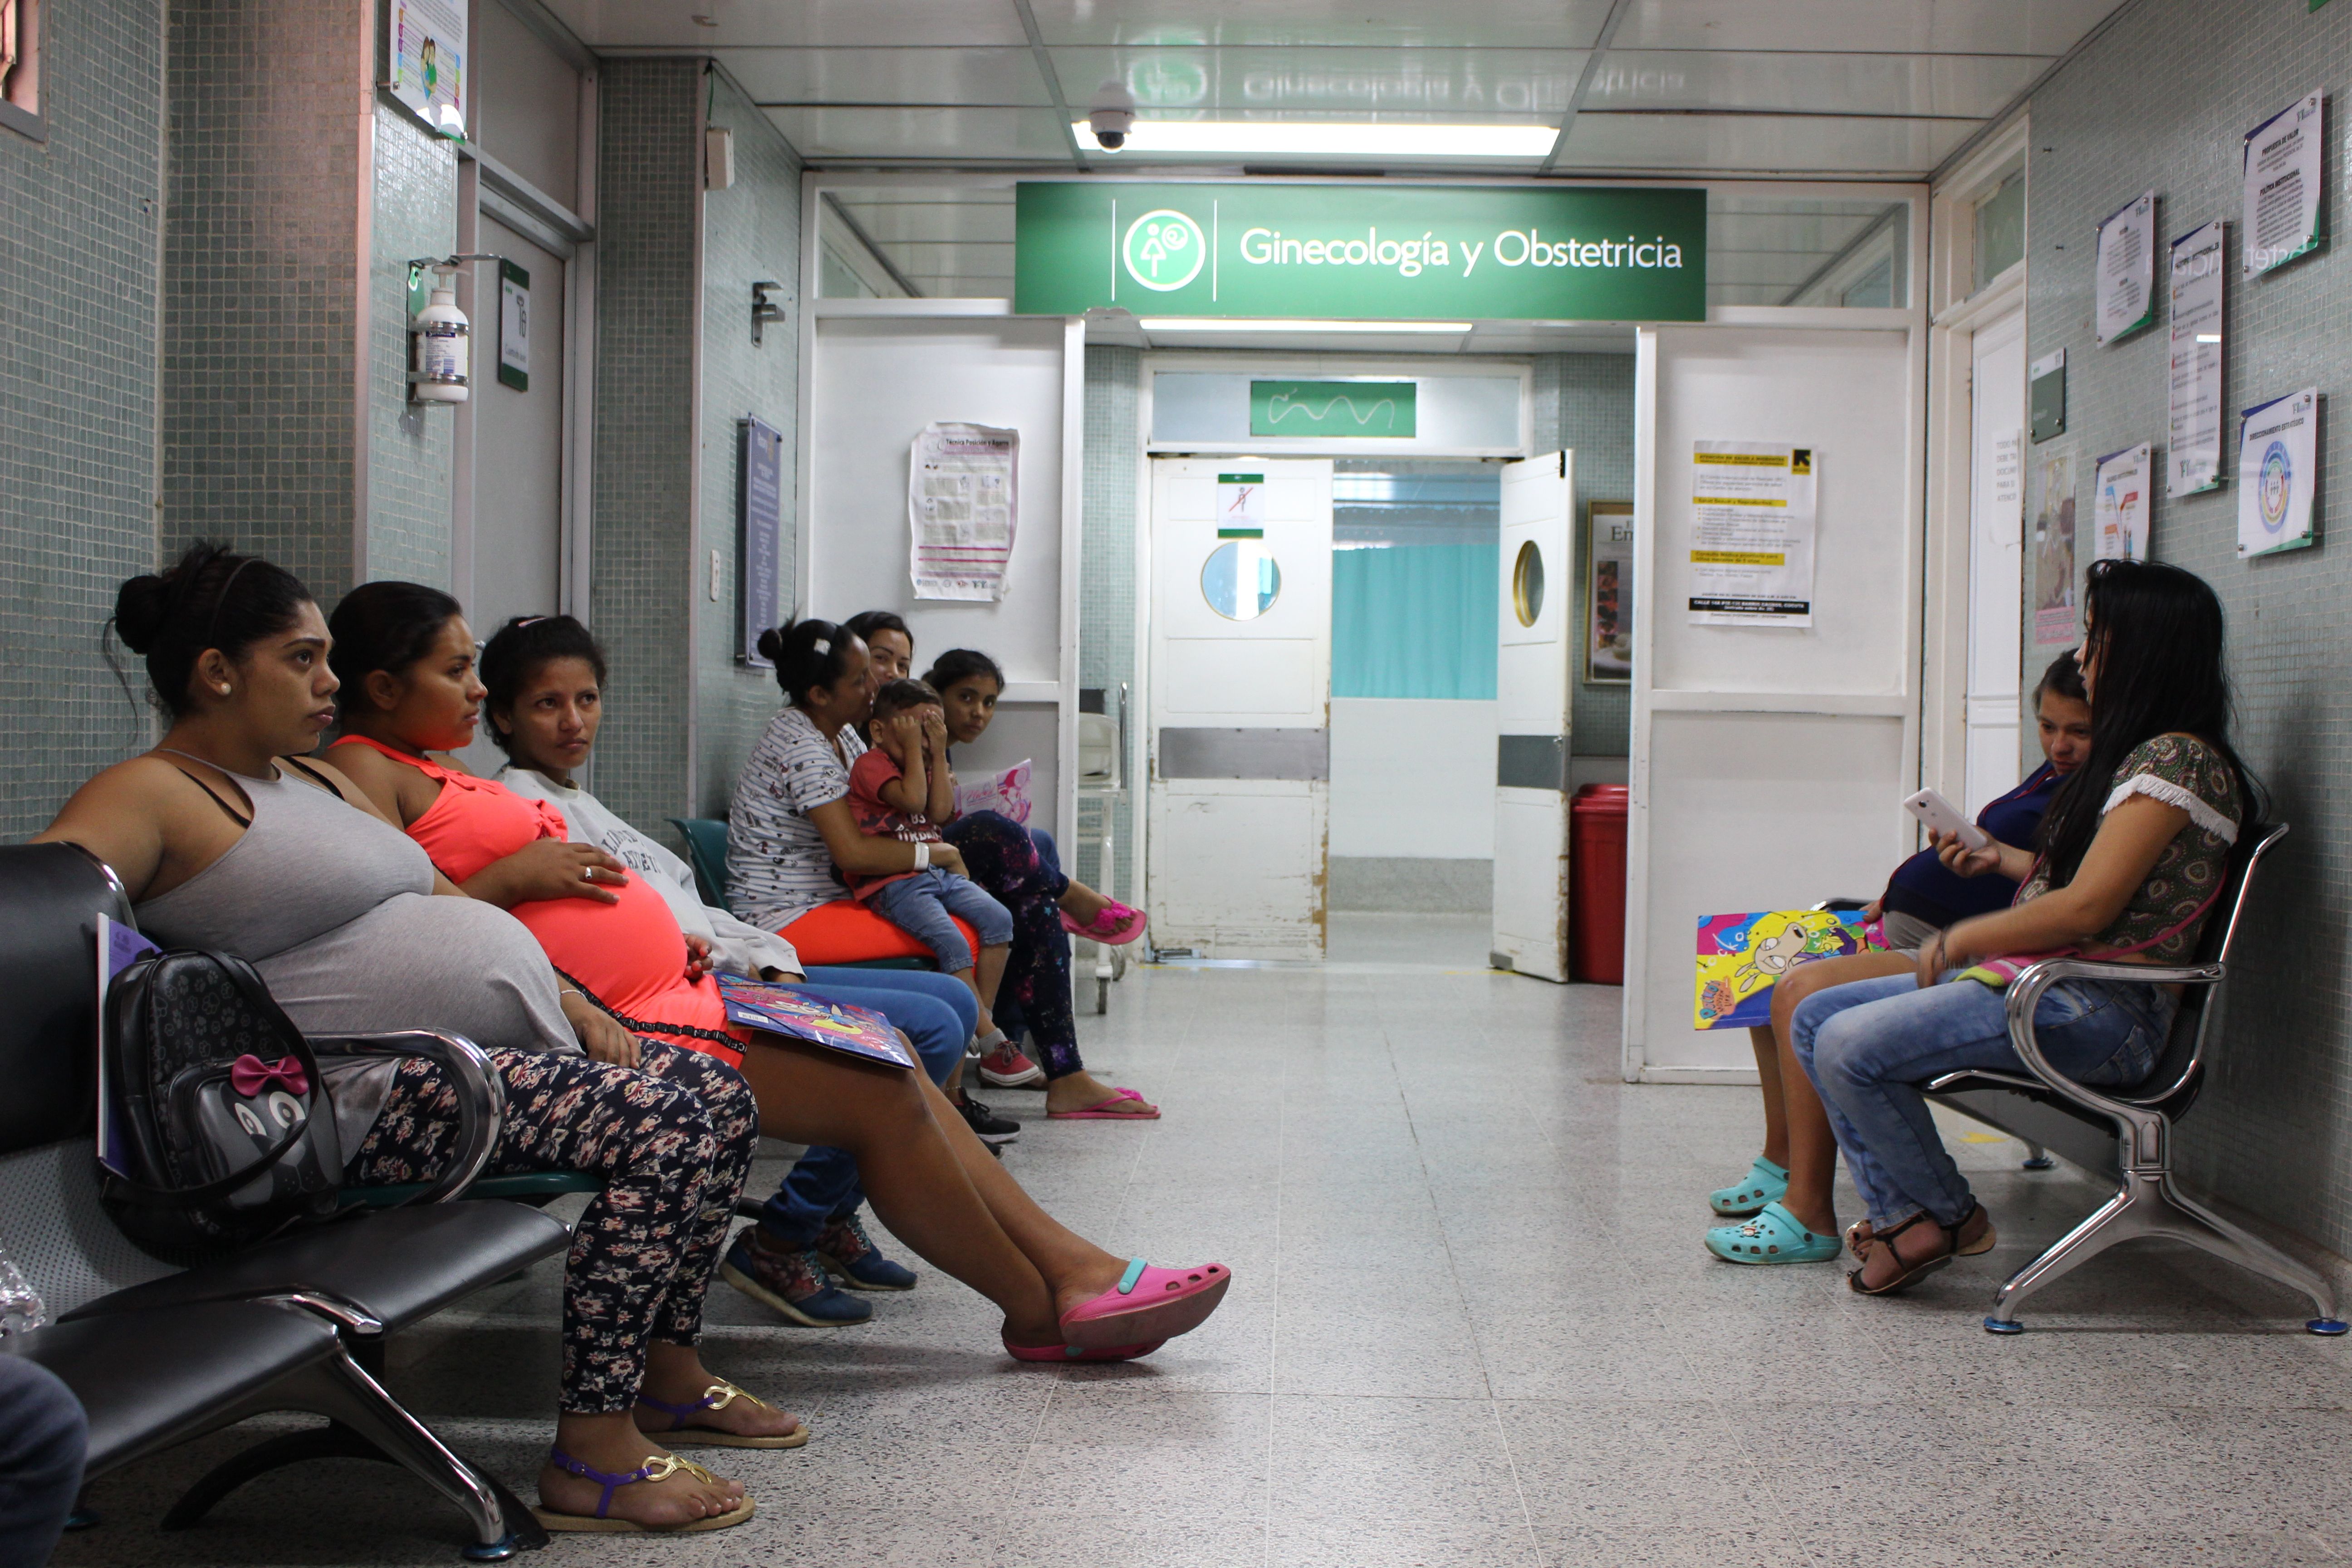 Pregnant mothers wait in the maternity wing at the Erasmo Meoz hospital. Image by Mariana Rivas. Colombia, 2019.

